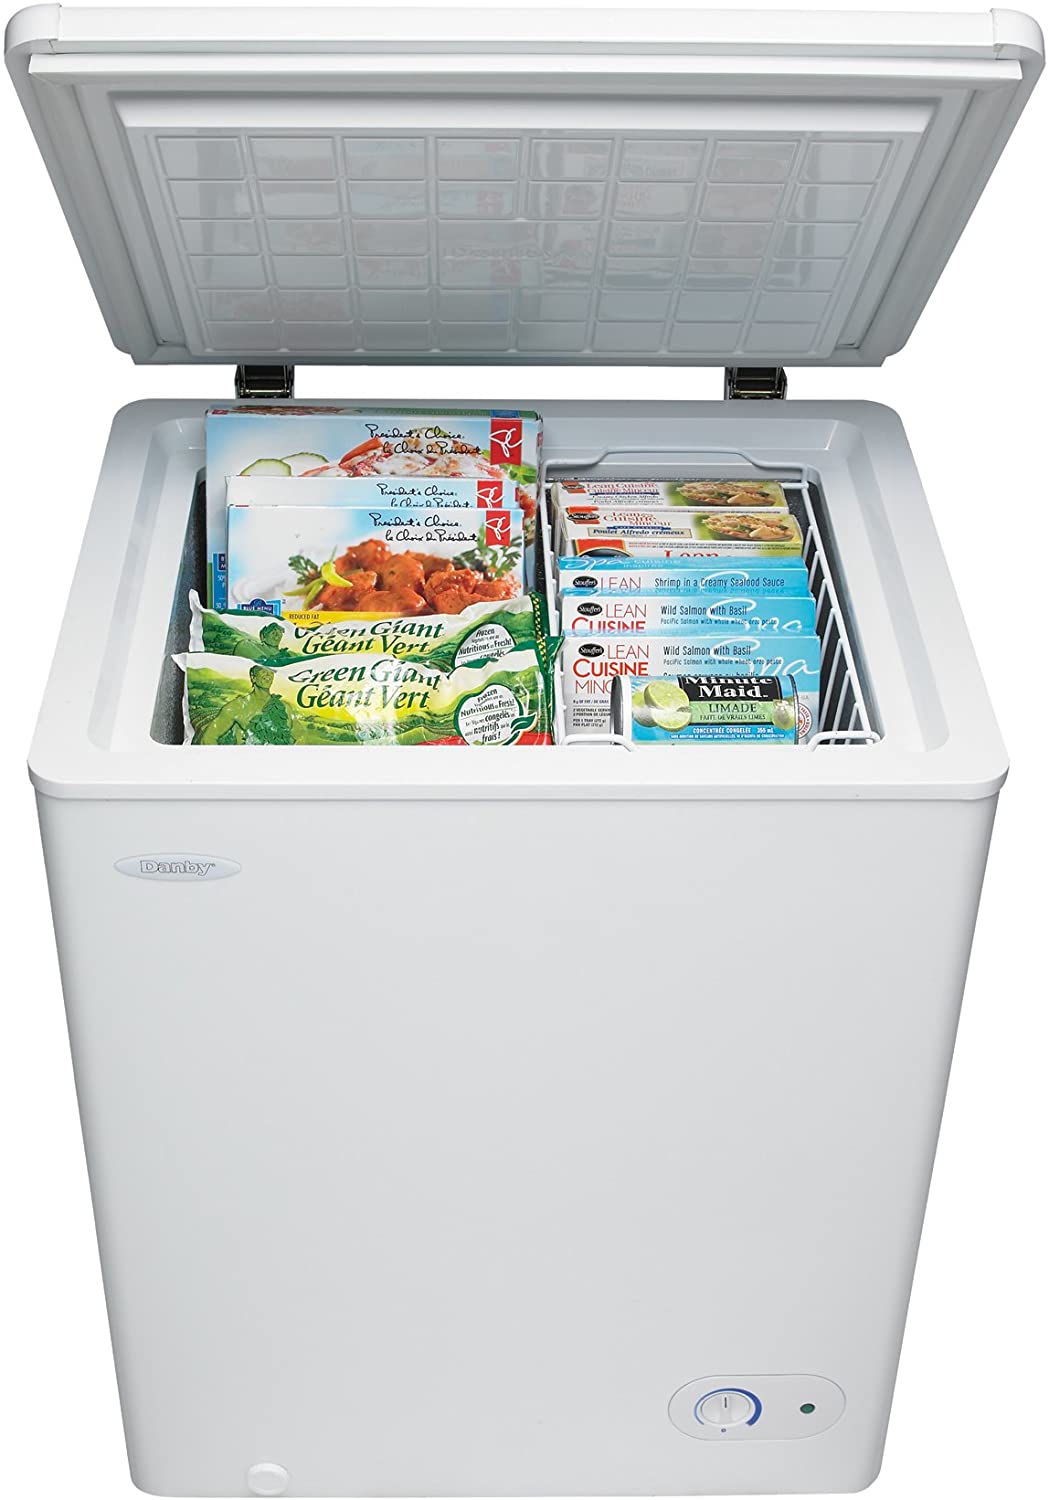 10 Best 3.5 Cu Ft Small Chest Freezer 2022 Review: Extra Storage Solution for Frozen Foods All In One Cooling Gear Lab: Any Refrigerators Air Conditioners Freezers Ice Makers Coolers Fans Reviewed And Compared.